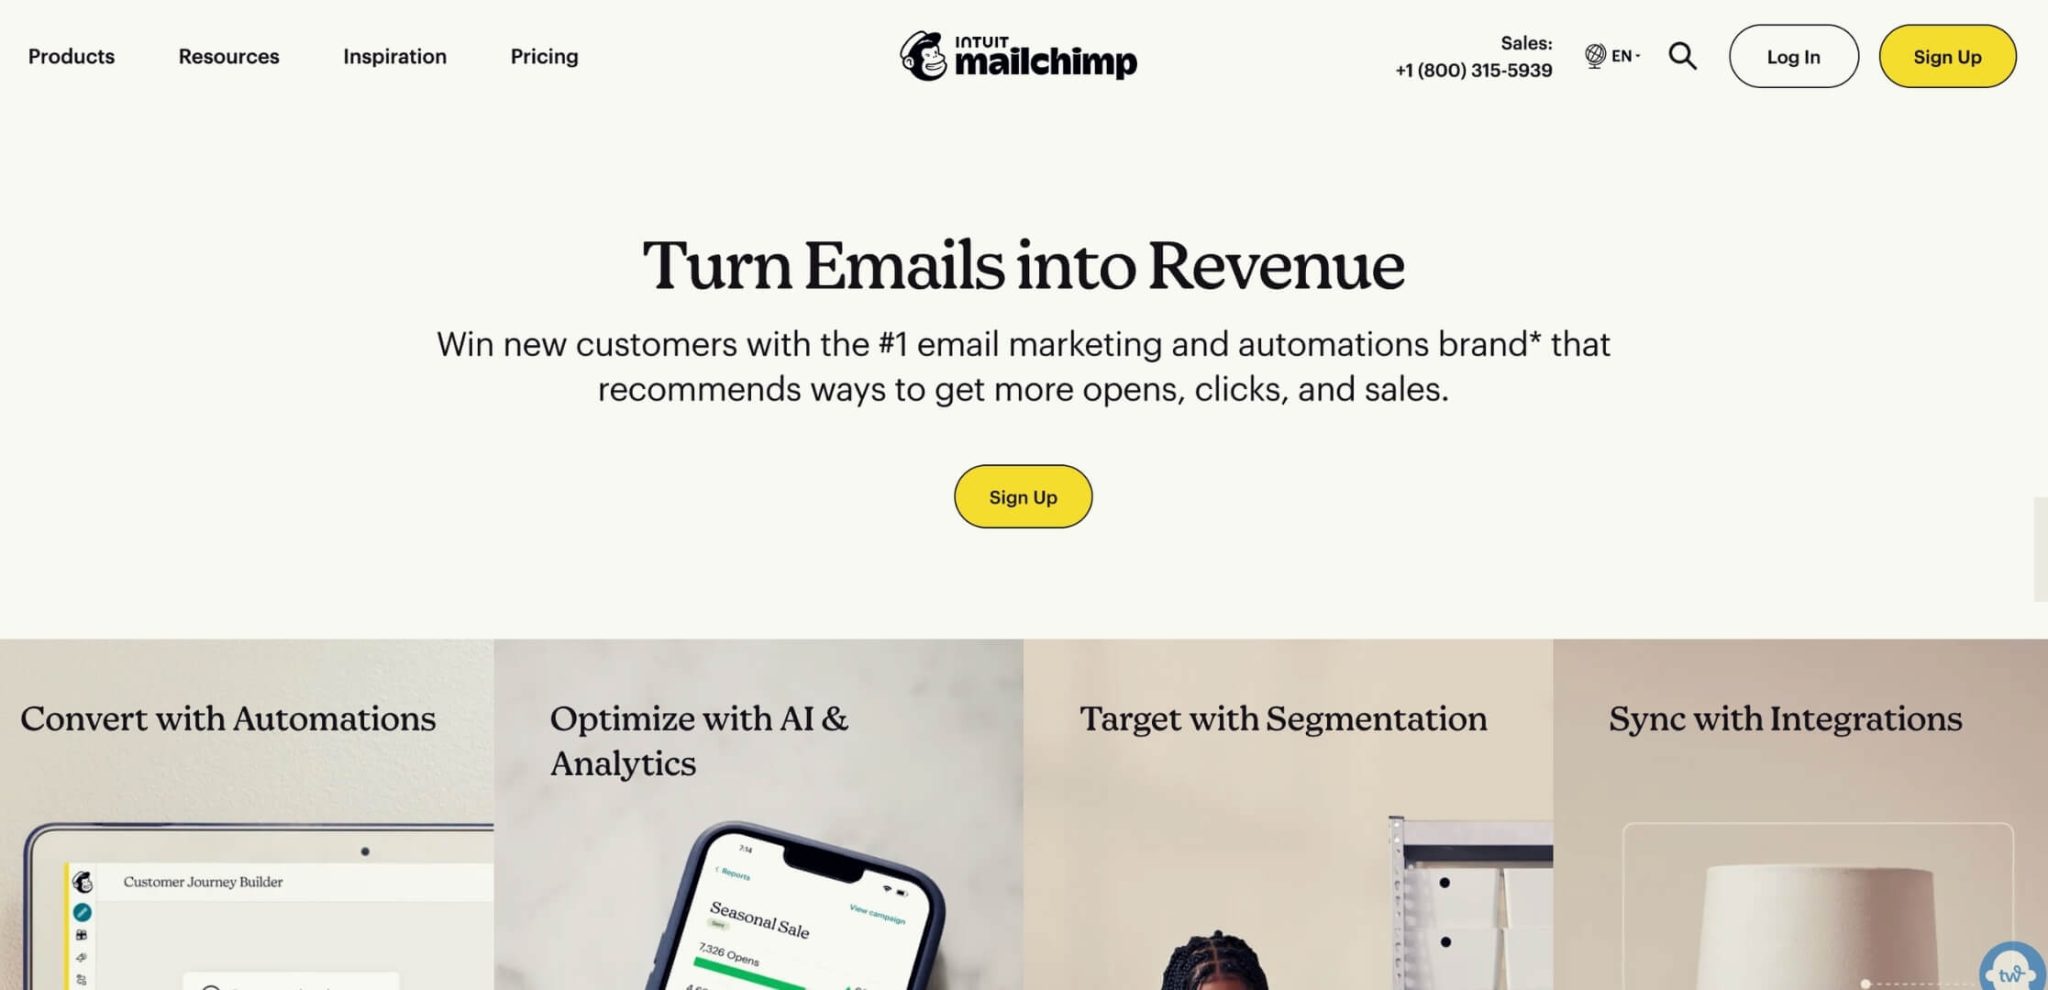 A screenshot from the home page of email marketing service Mailchimp